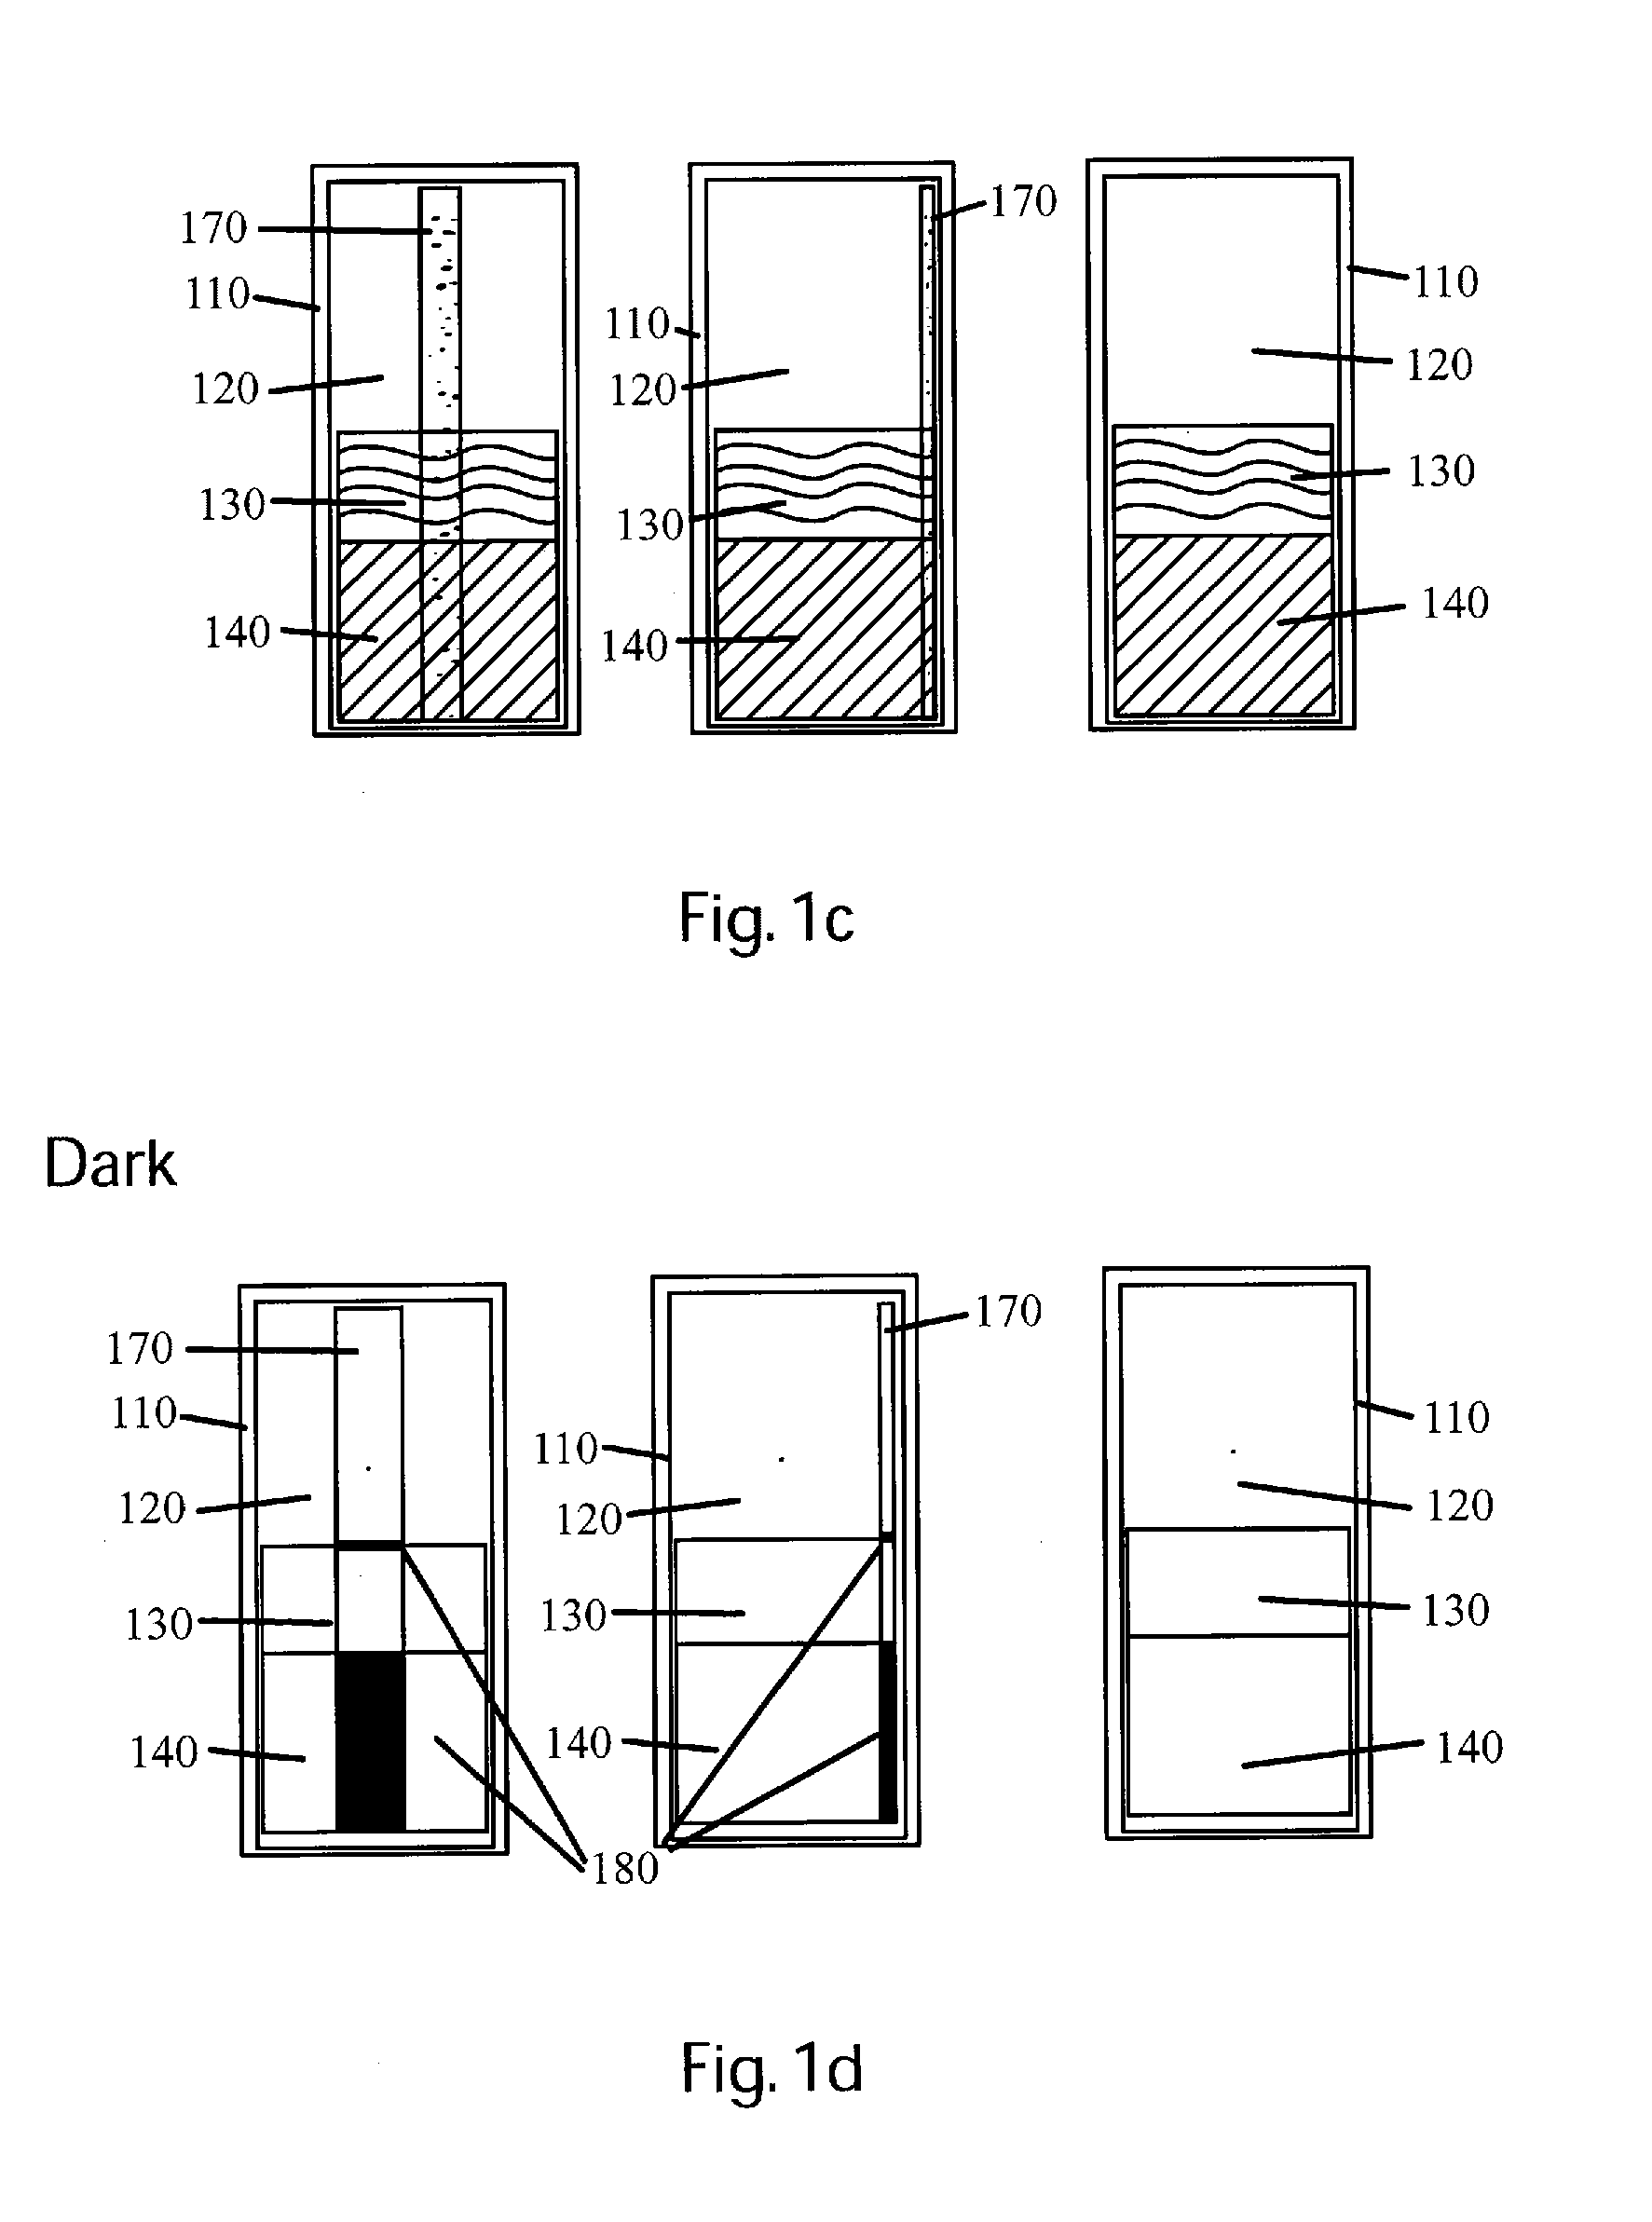 Method for detection and analysis of aromatic hydrocarbons from water